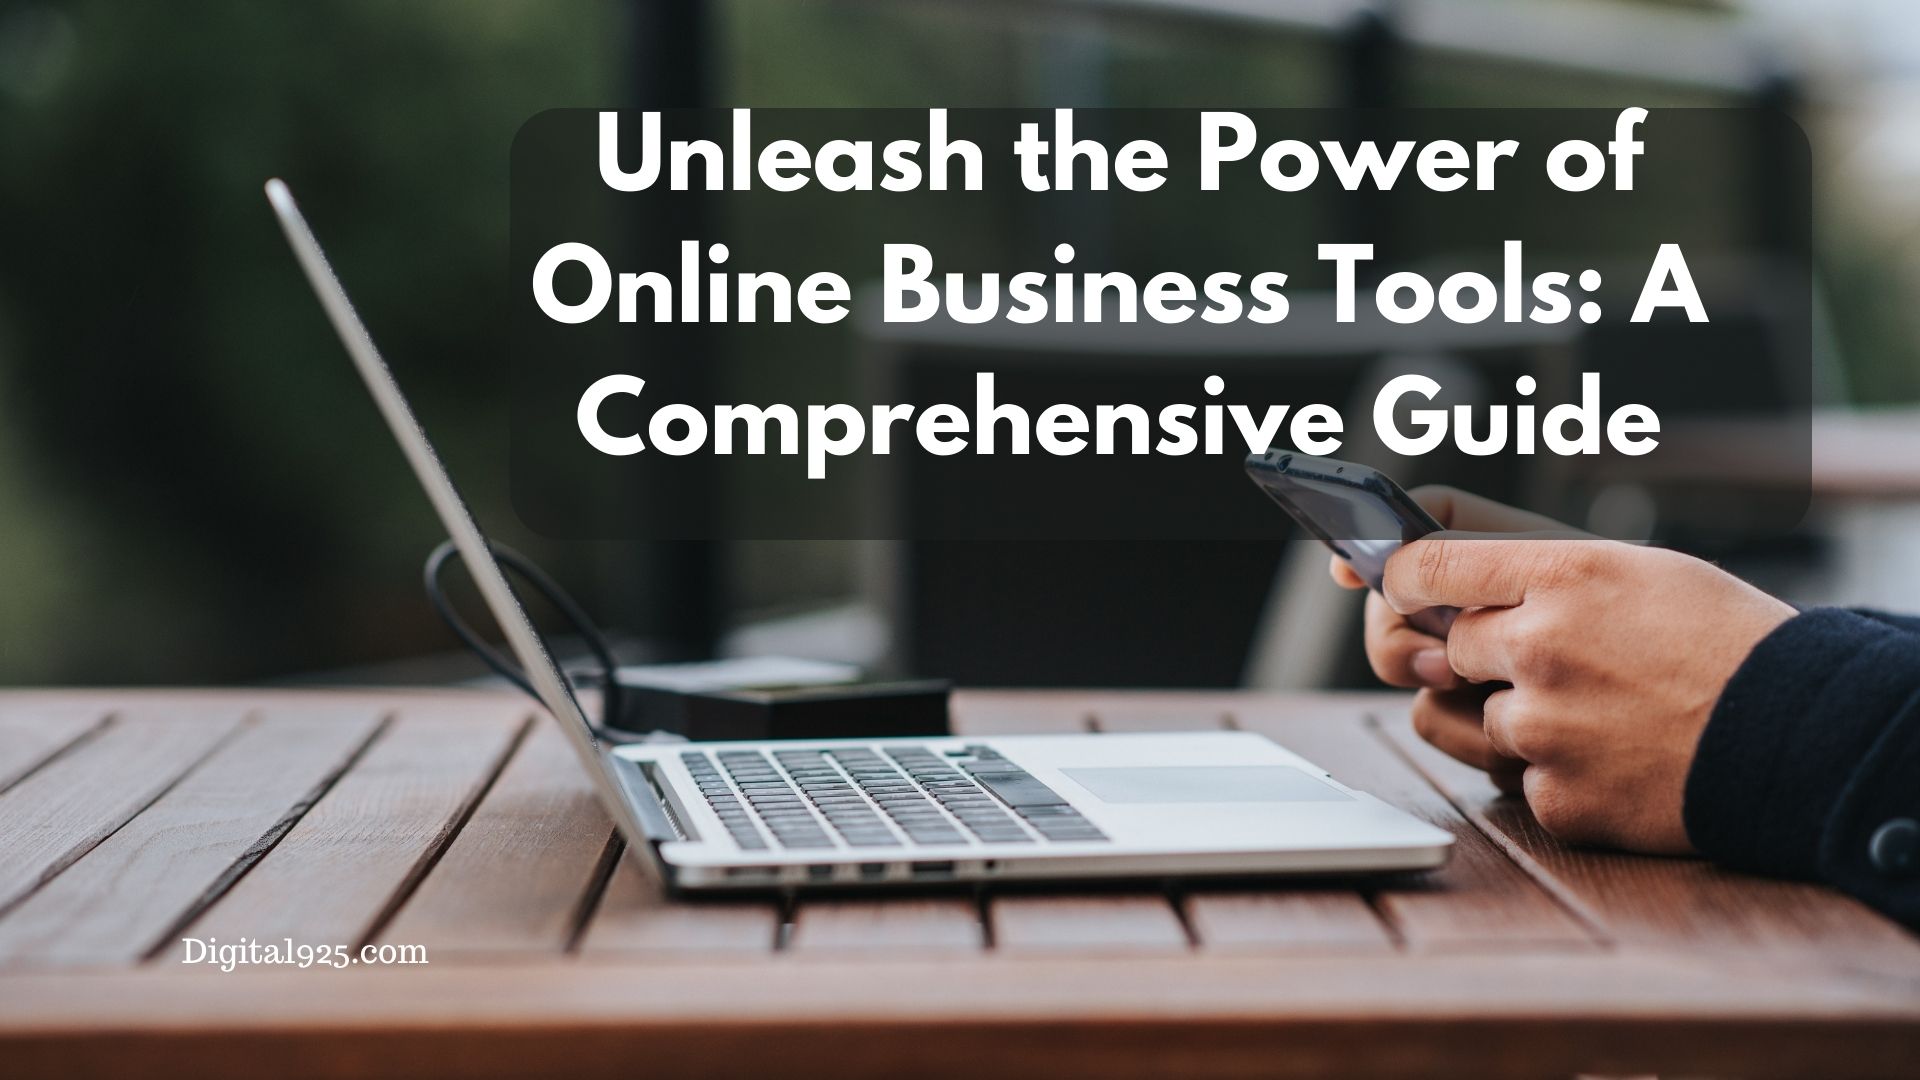 Unleash the Power of Online Business Tools: A Comprehensive Guide